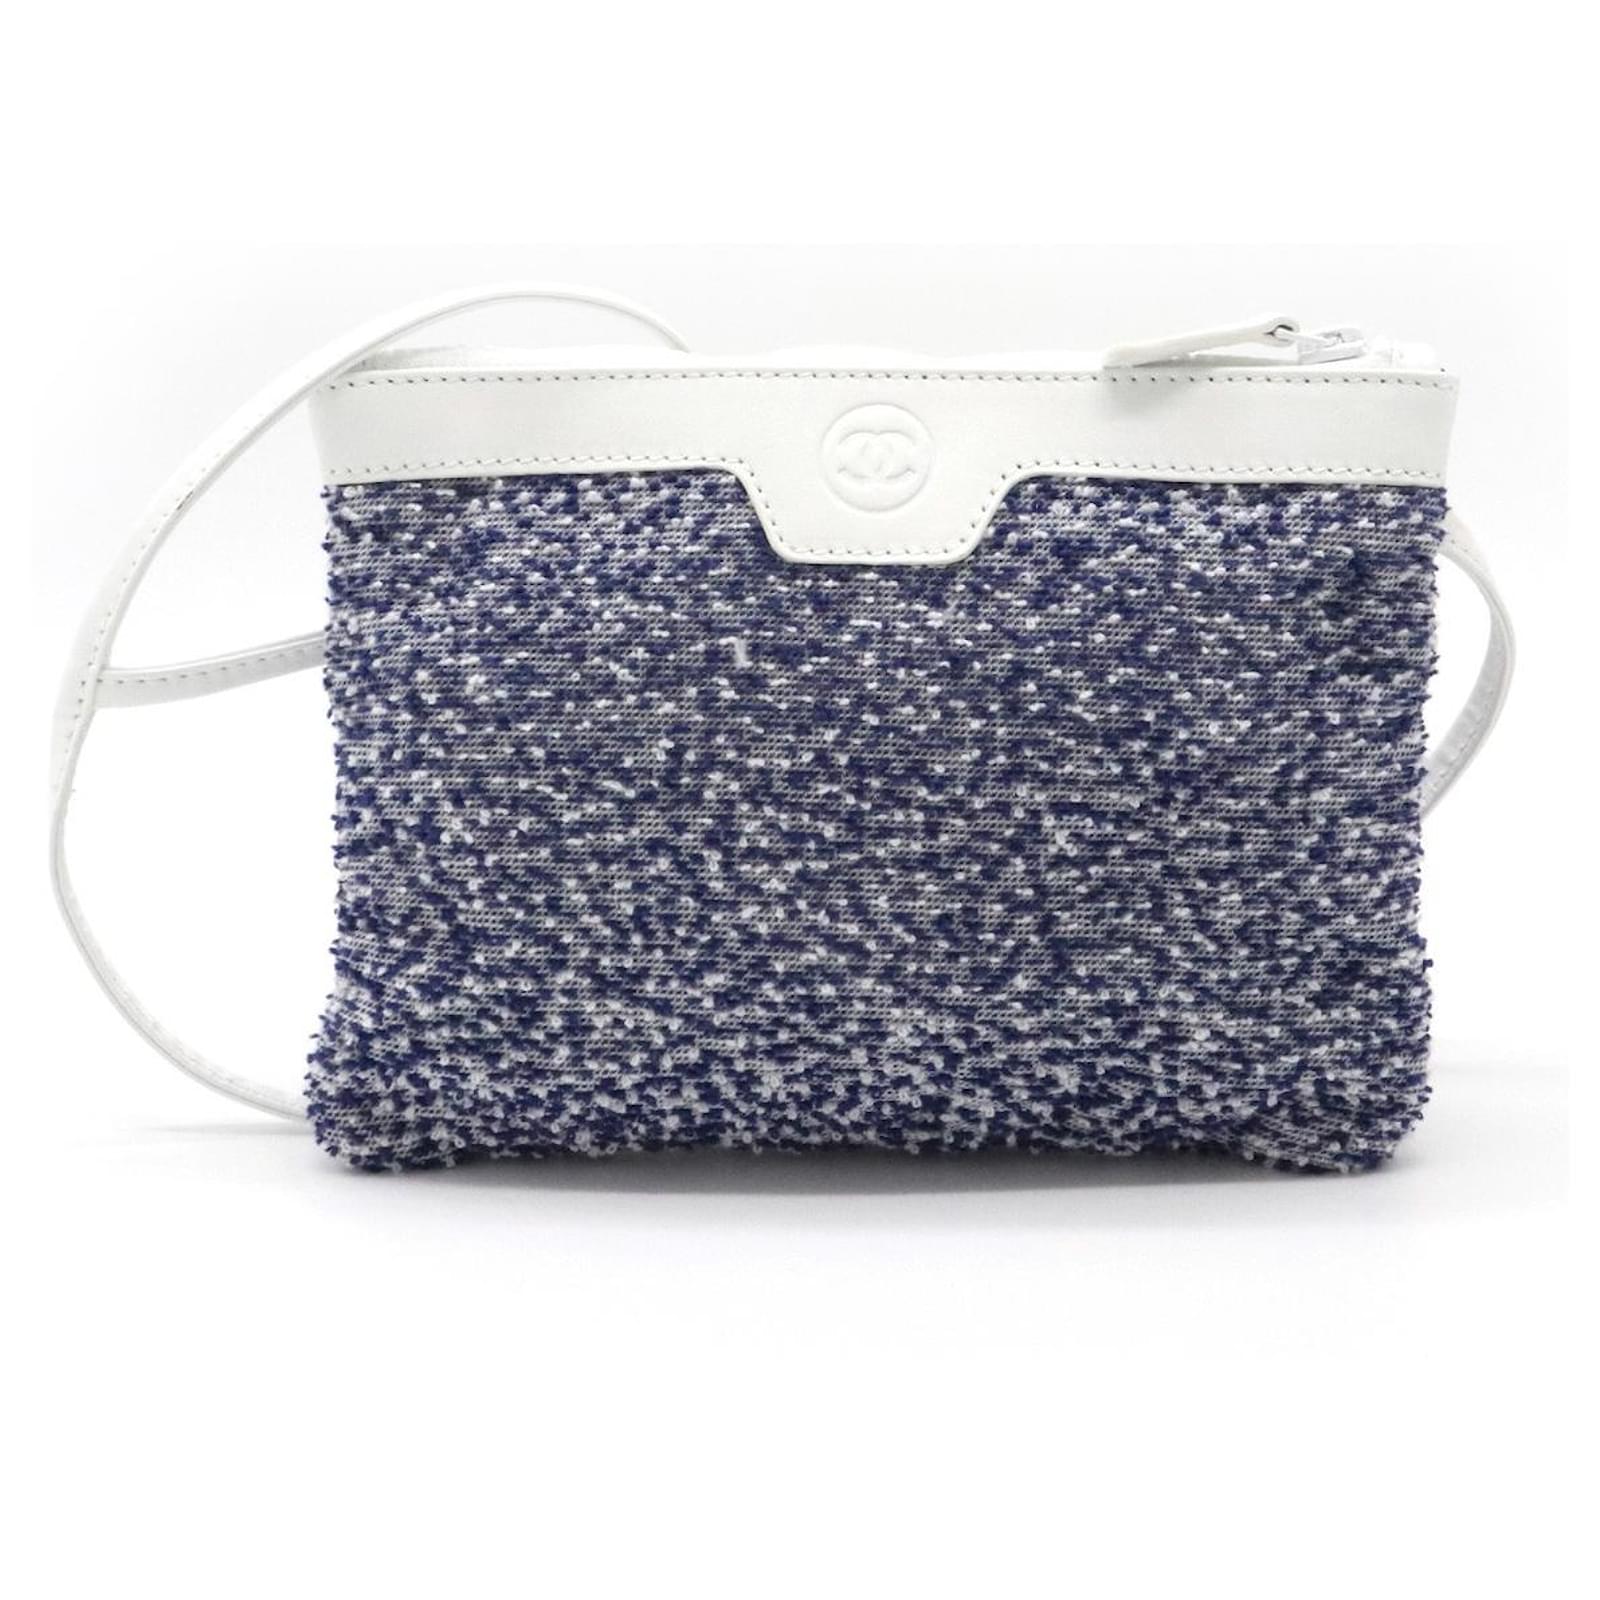 Love Cosmetic Bag: Blue on Brown– LOVEVOLVE ®